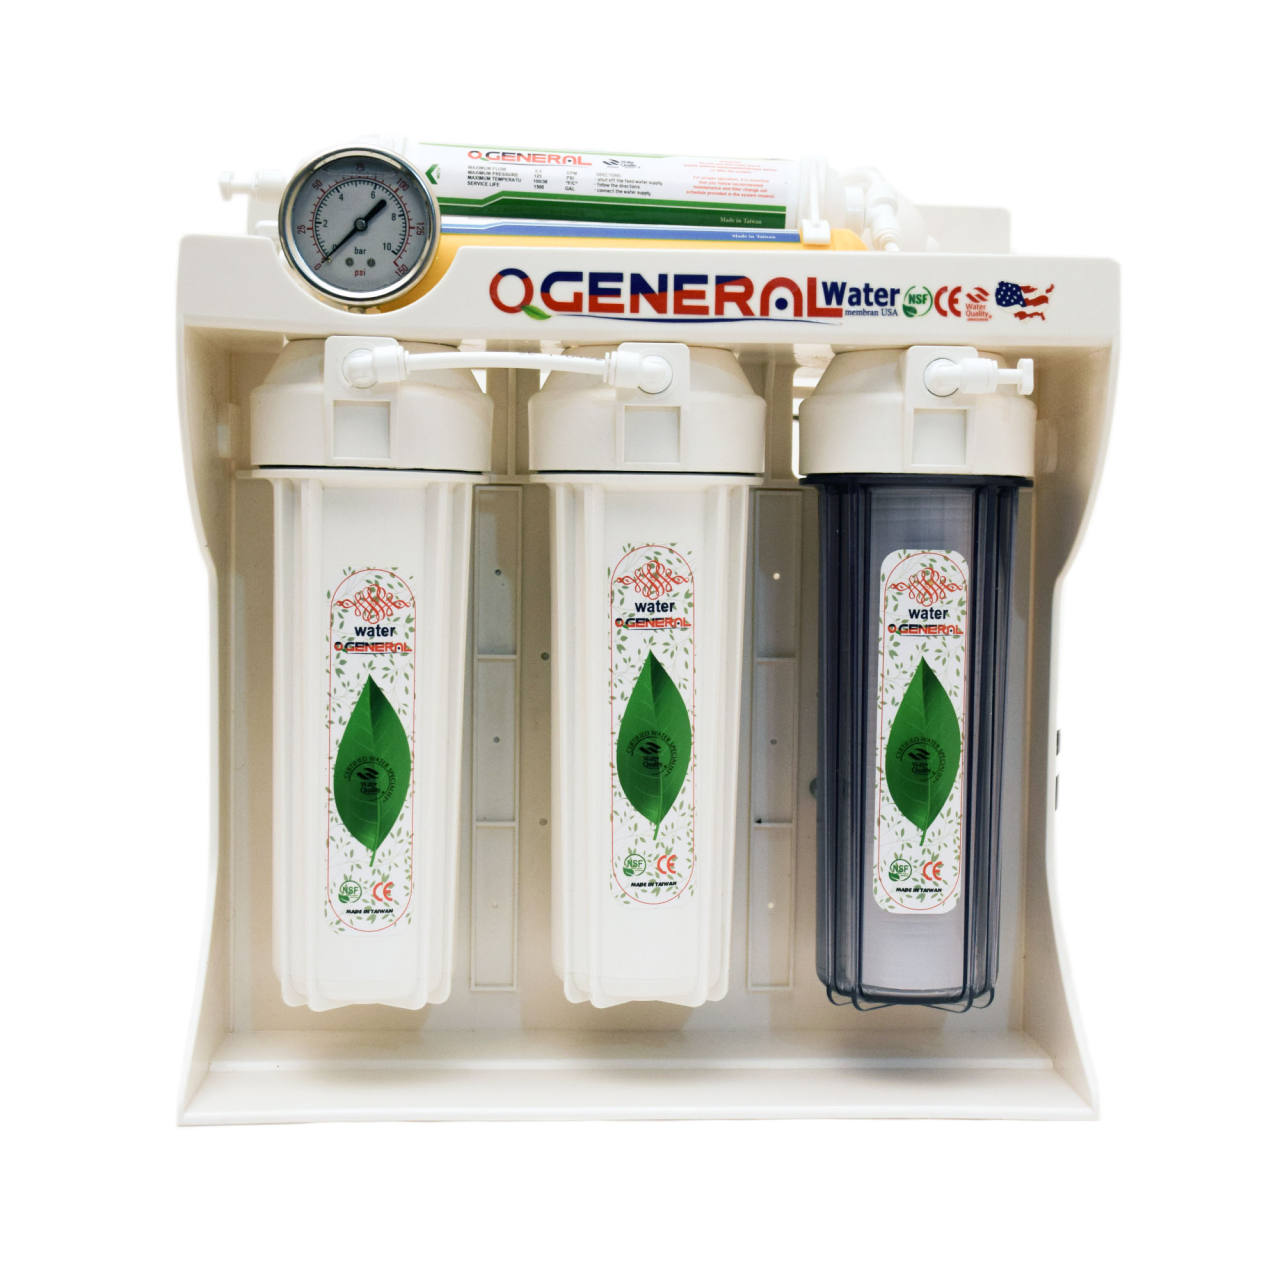 ogeneral water purifier RO system 1